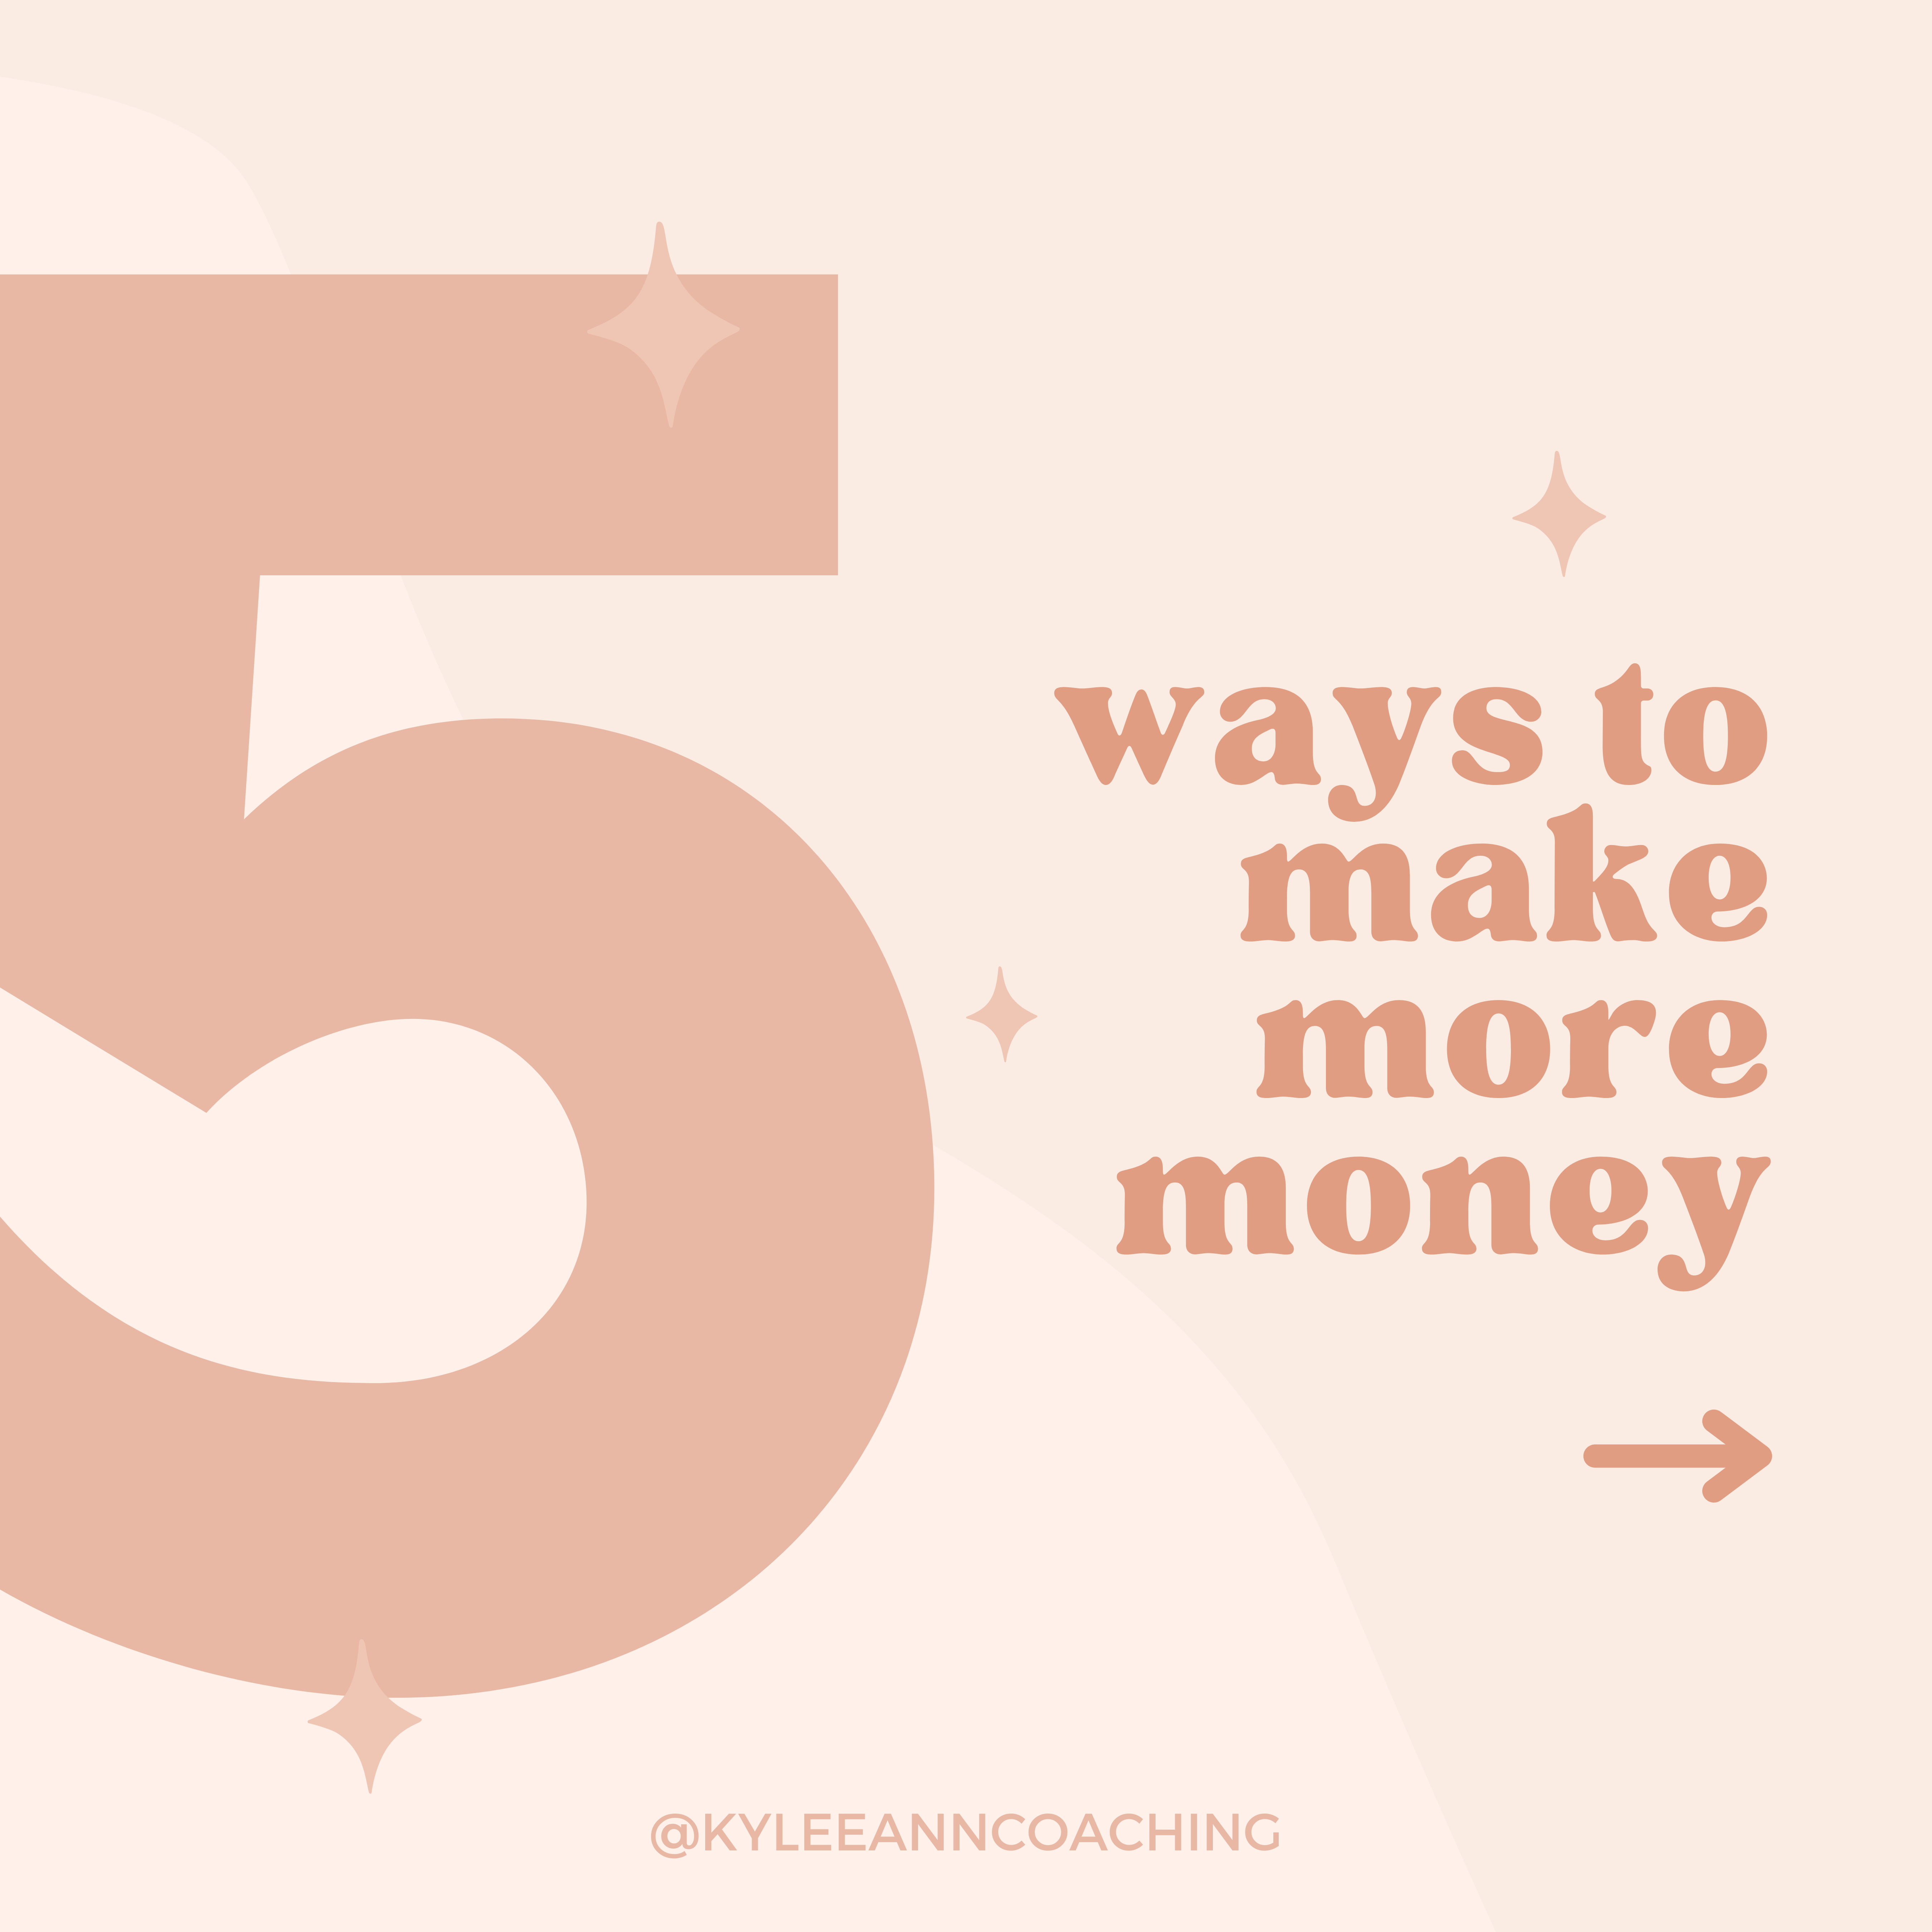 How to Make More Money